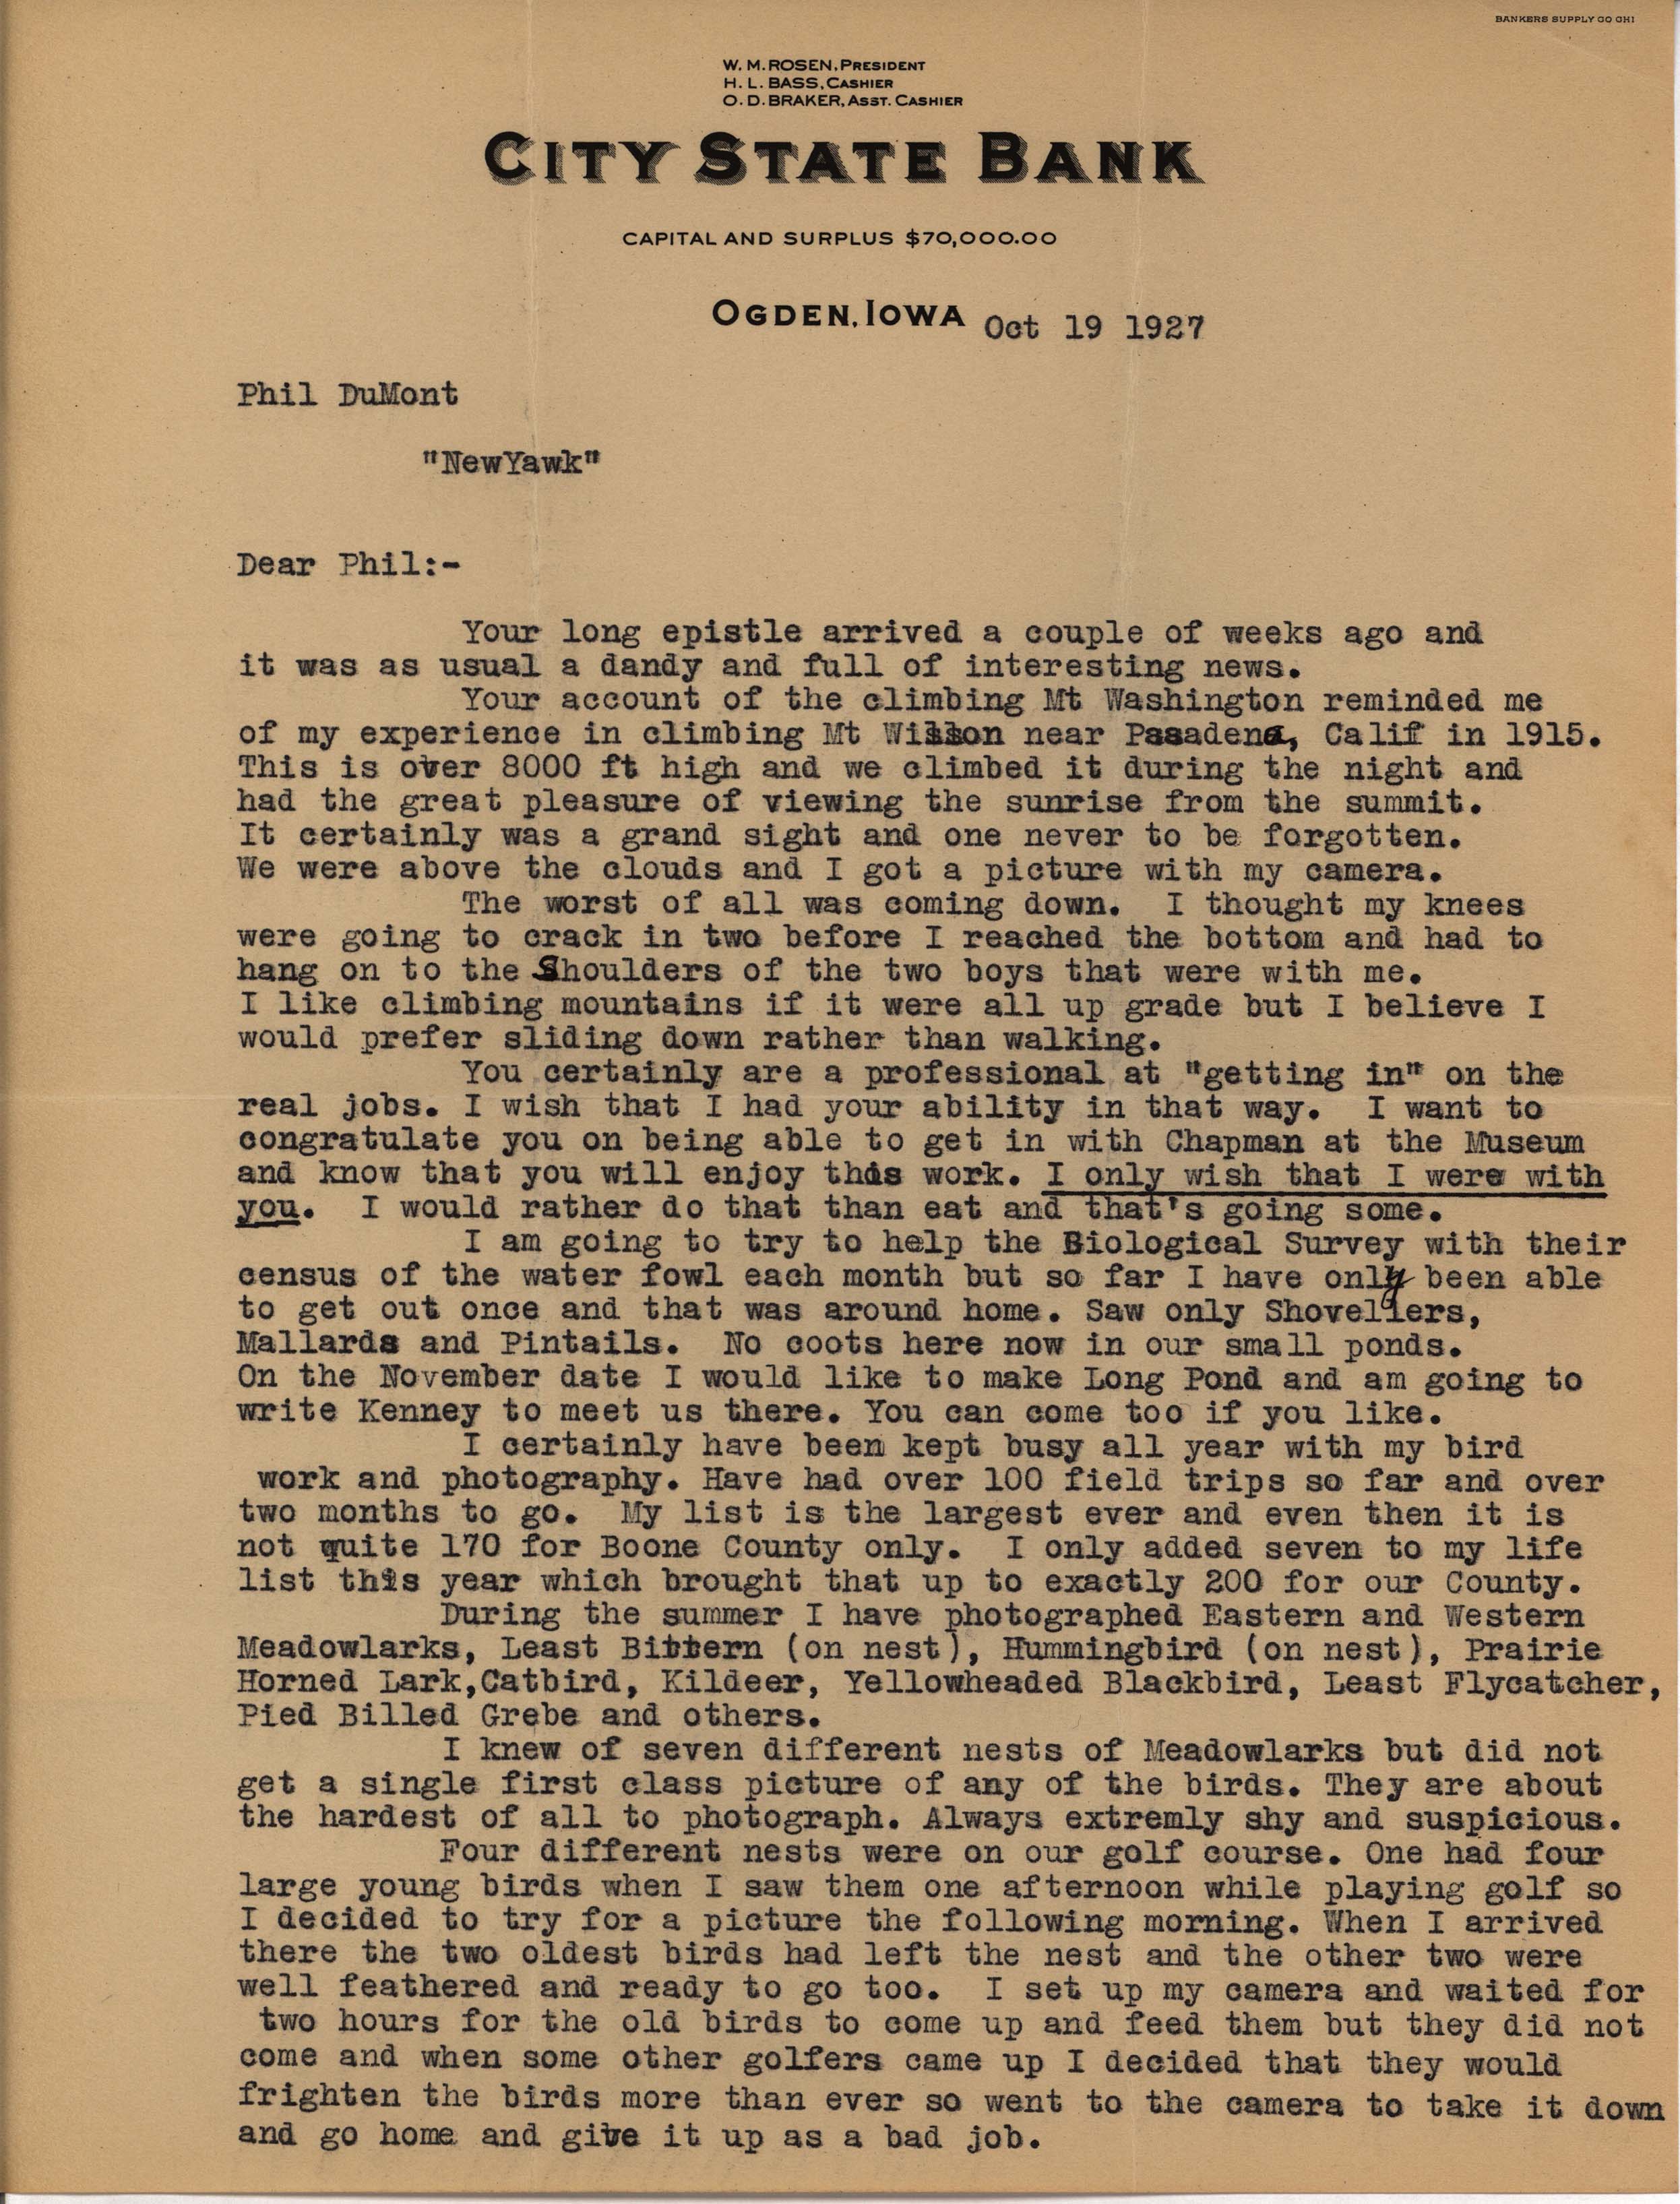 Walter Rosene letter to Philip DuMont regarding the Biological Survey, photography, and nests, October 19, 1927